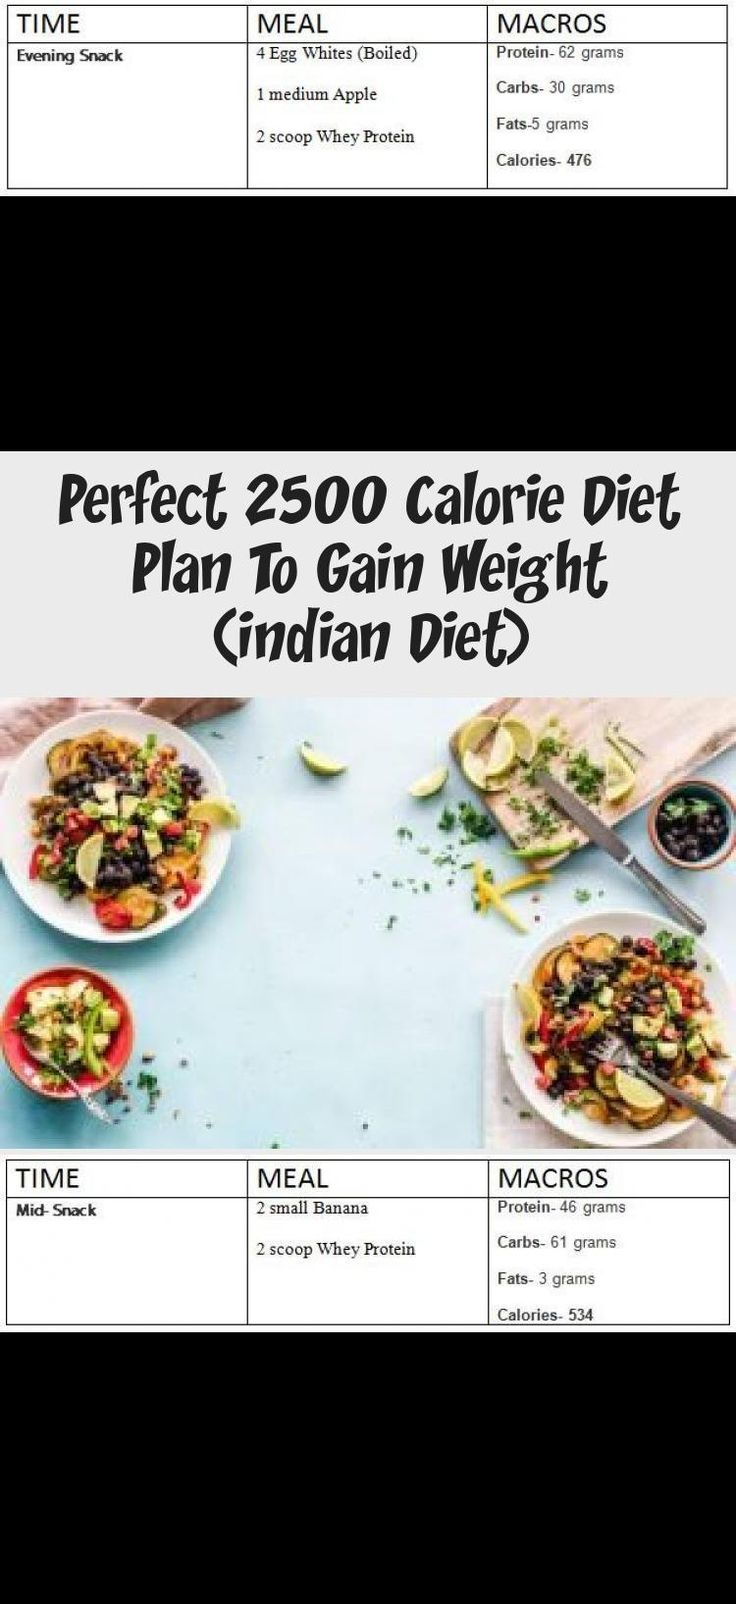 Perfect 2500 Calorie Diet Plan To Gain Weight indian Diet 